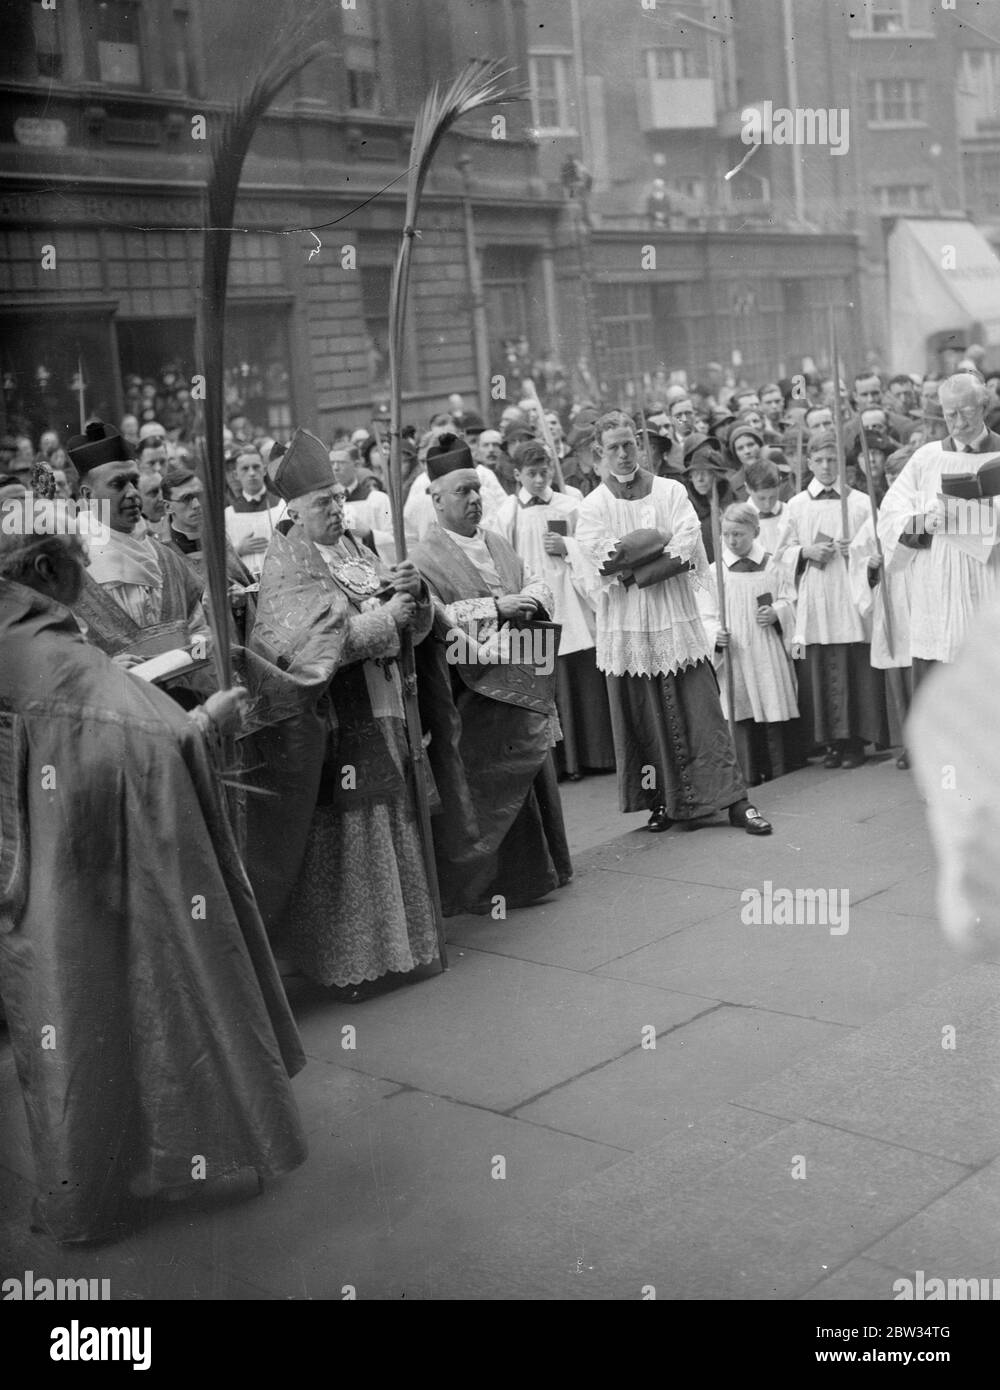 Cardinal Bourne heads Palm Sunday procession at Westminster Cathedral . Cardinal Bourne , head of the Roman Catholic church in England , headed the Palm Sunday procession to Westminster Cathedral , London . Cardinal Bourne blessing the palms at the ceremony outside the Cathedral . 20 March 1932 Stock Photo